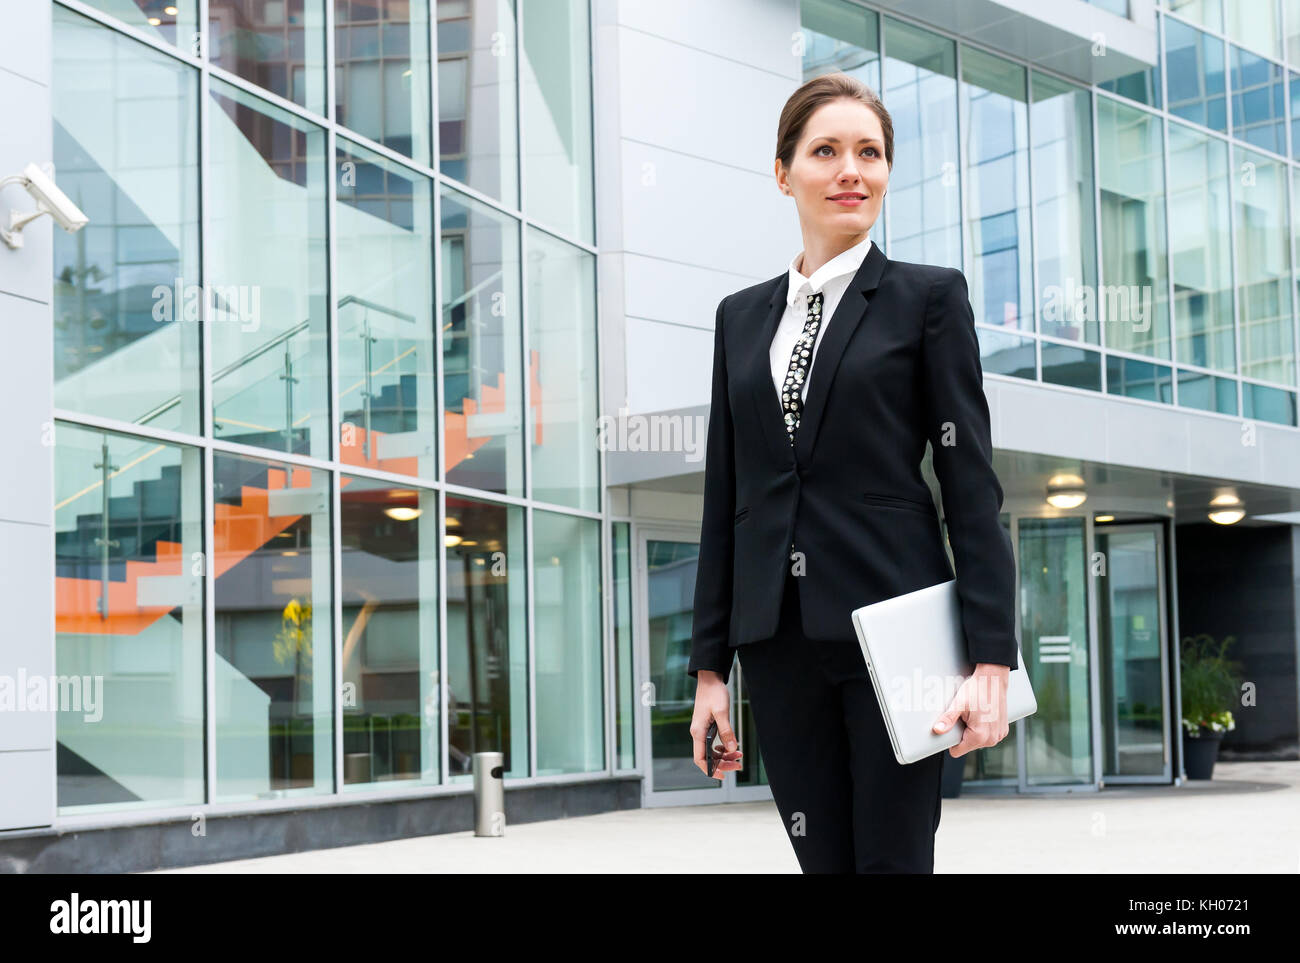 Young business woman portrait Stock Photo